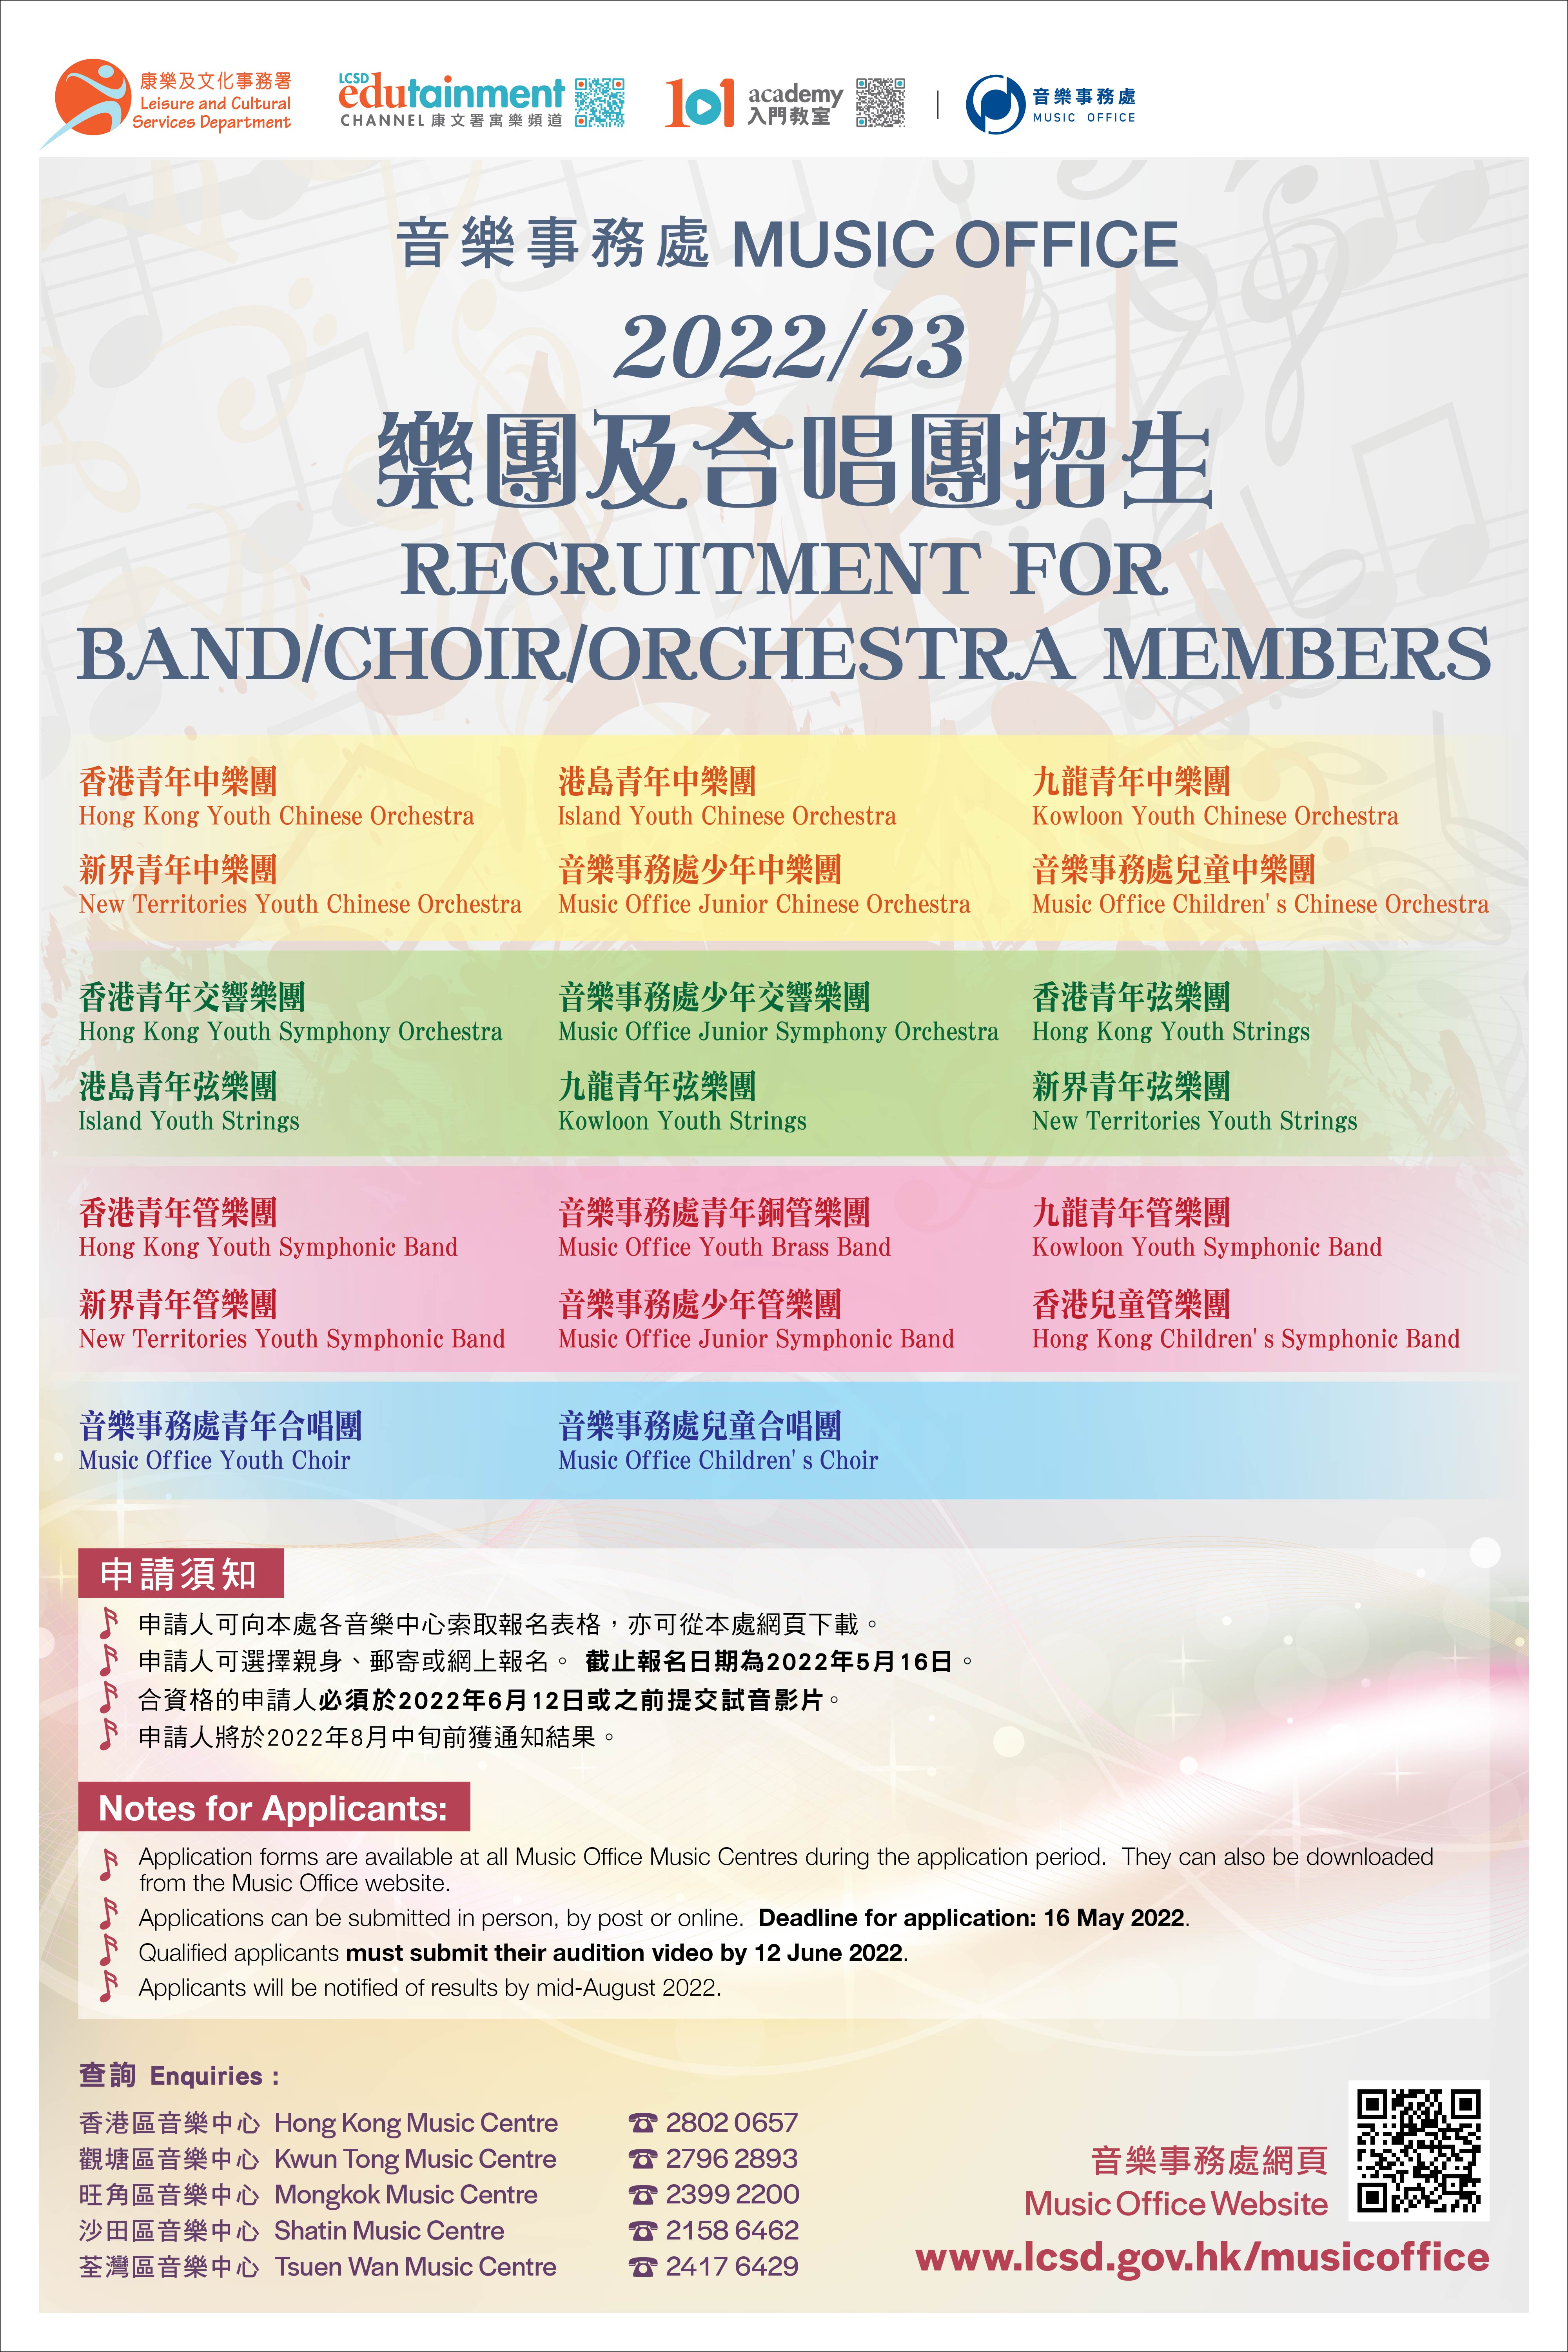 Recruitment for 2022/23 Band/Choir/Orchestra Members